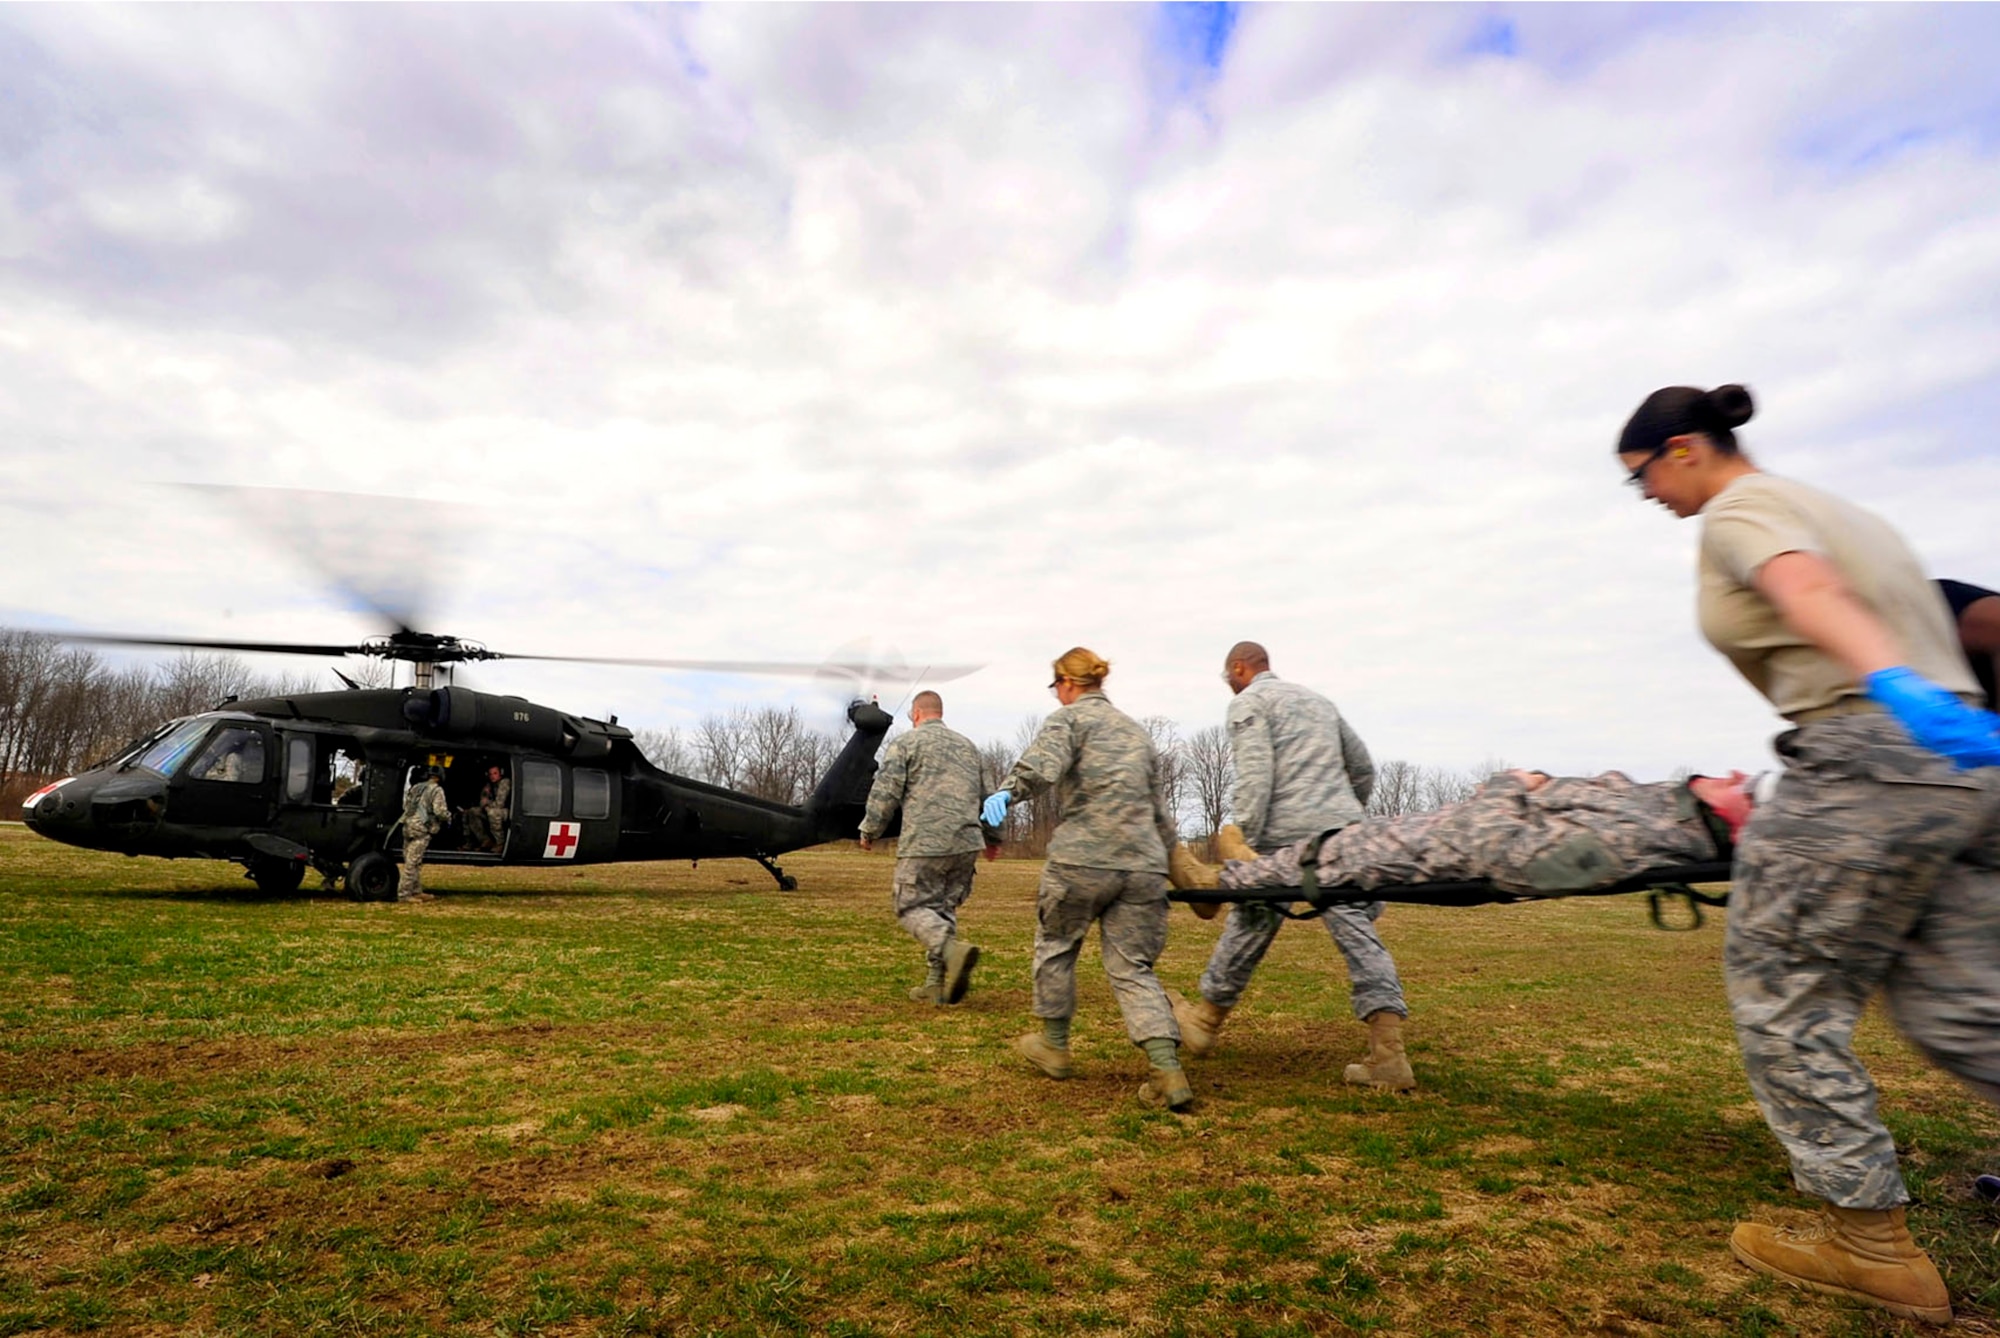 Airmen with the 99th Medical Group, stationed at Nellis Air Force Base, Nev., carry a ?patient? to a UH-60 Black Hawk March 17, 2011, during Exercise Vibrant Response at Camp Atterbury, Ind. Defense Secretary Robert Gates recently promised more forward-deployed medical capabilities for service members in Afghanistan. 